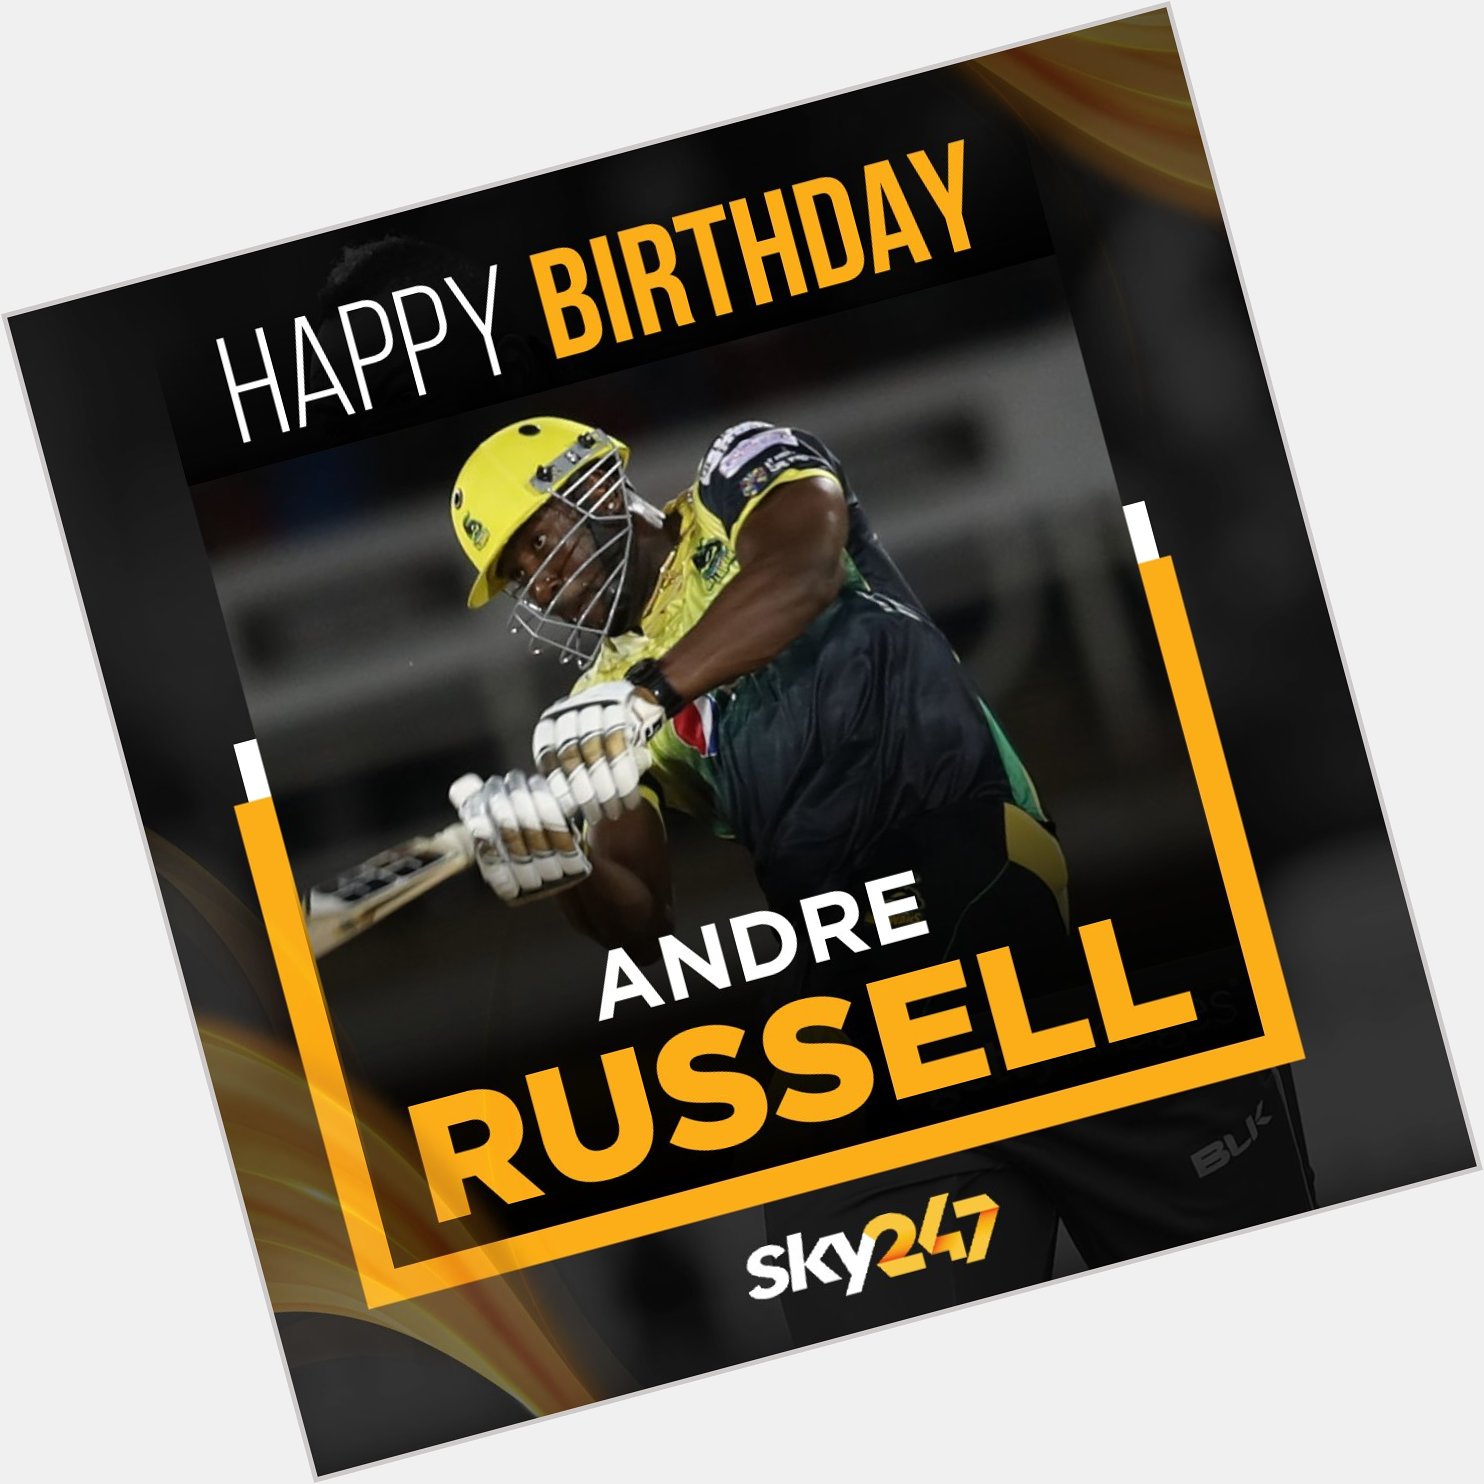 Wishing Andre Russell a very happy birthday.     